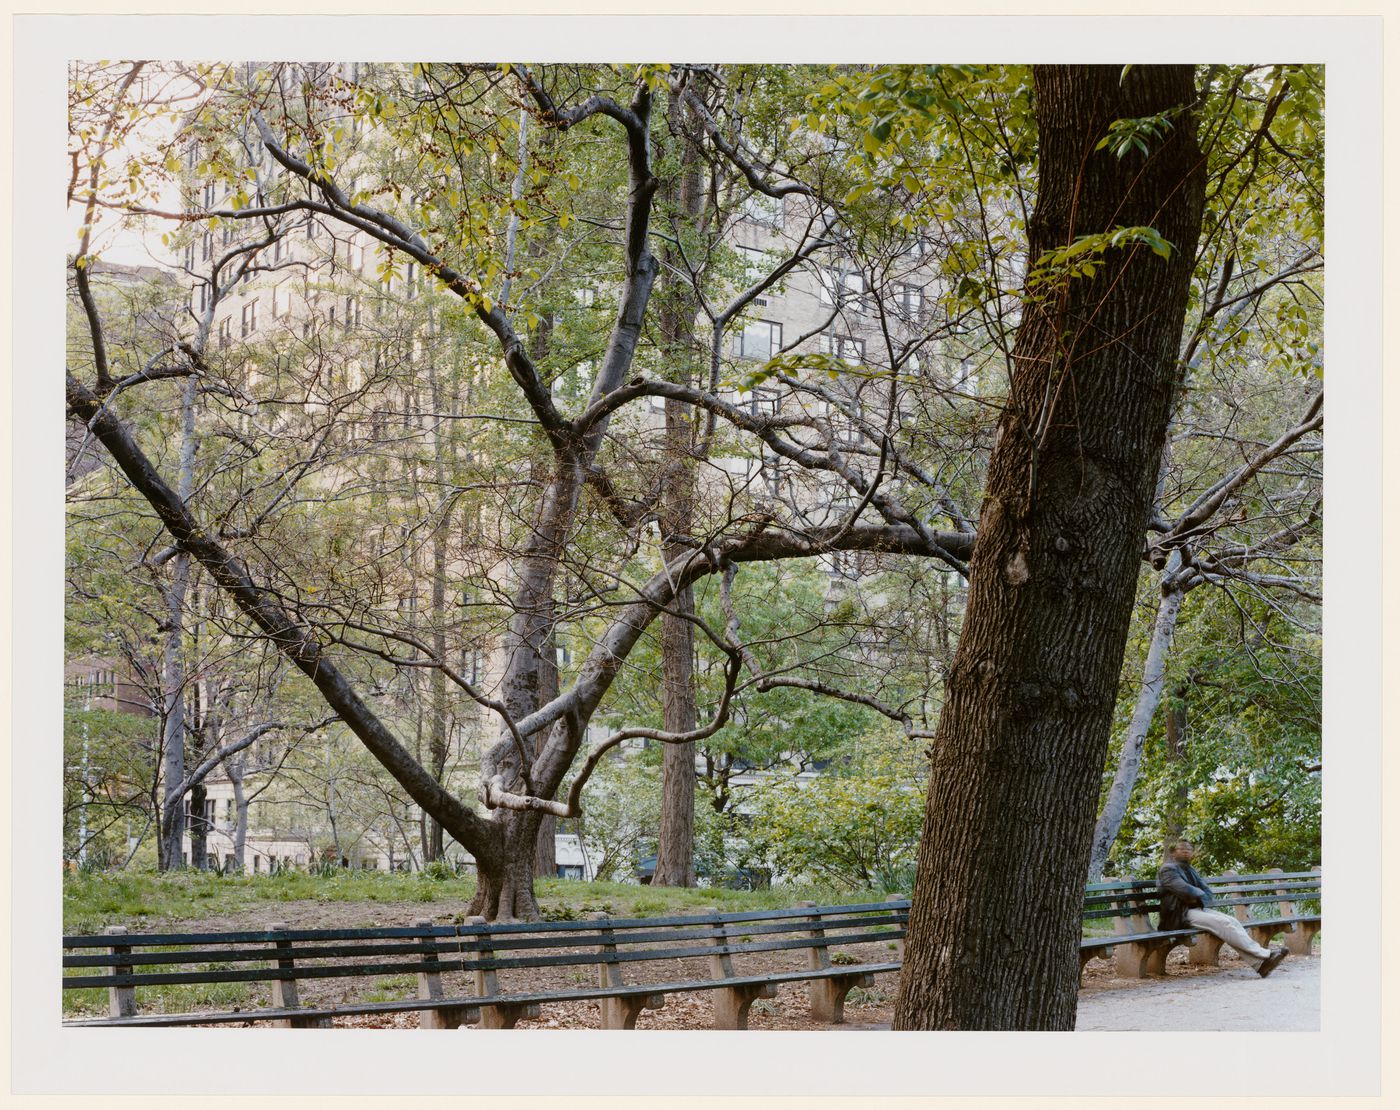 Viewing Olmsted: View of benches with trees, East Side, Central Park, New York City, New York